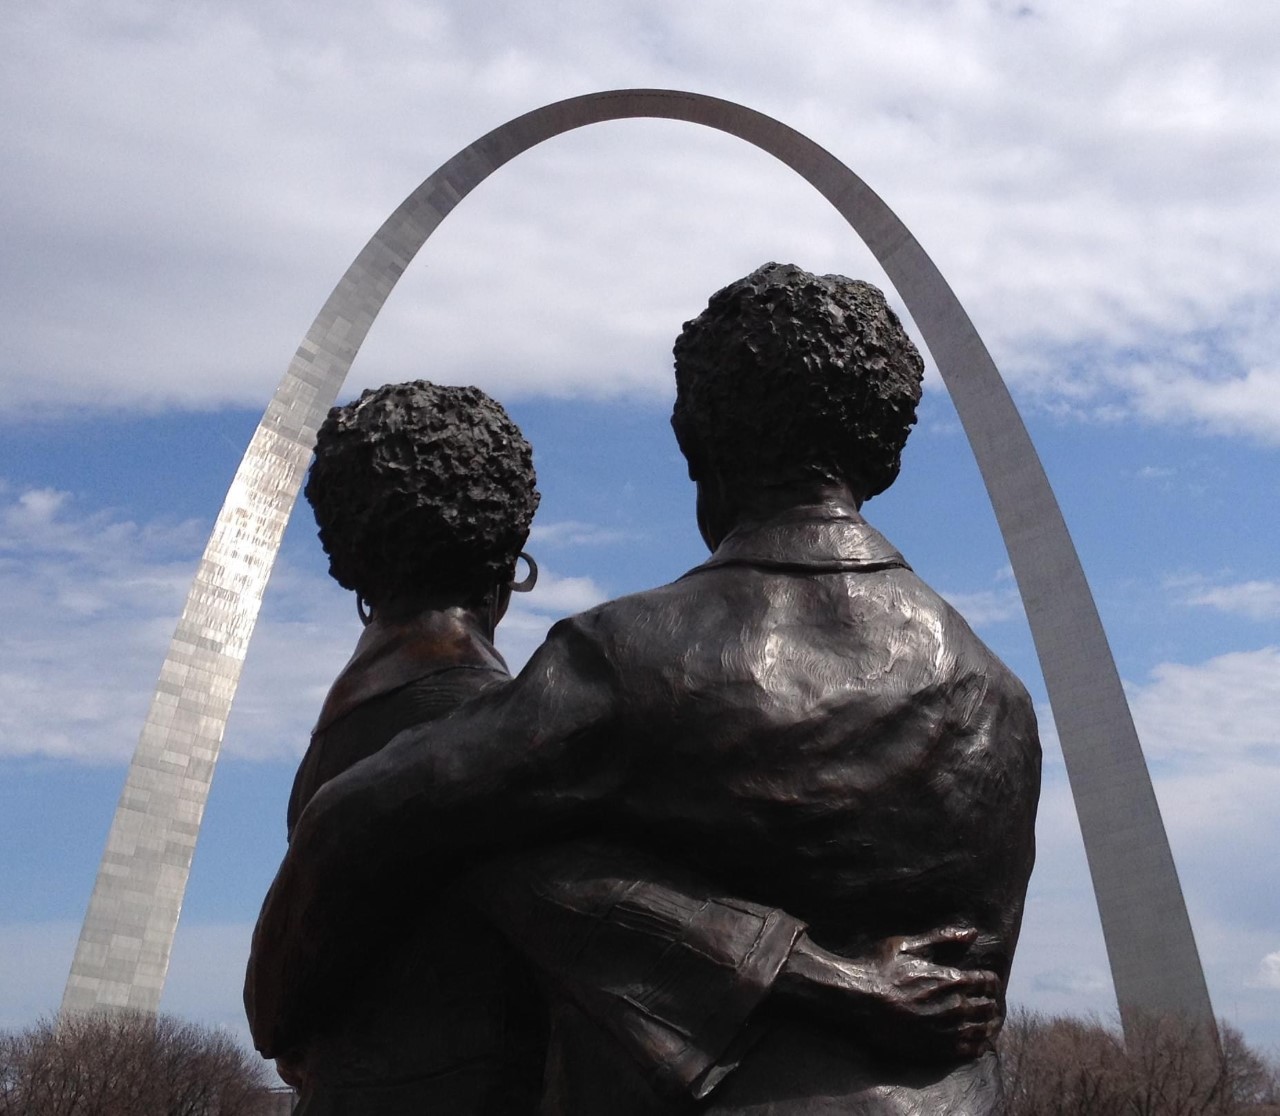 Reckoning with Slavery's Legacy in St. Louis (U.S. National Park Service)